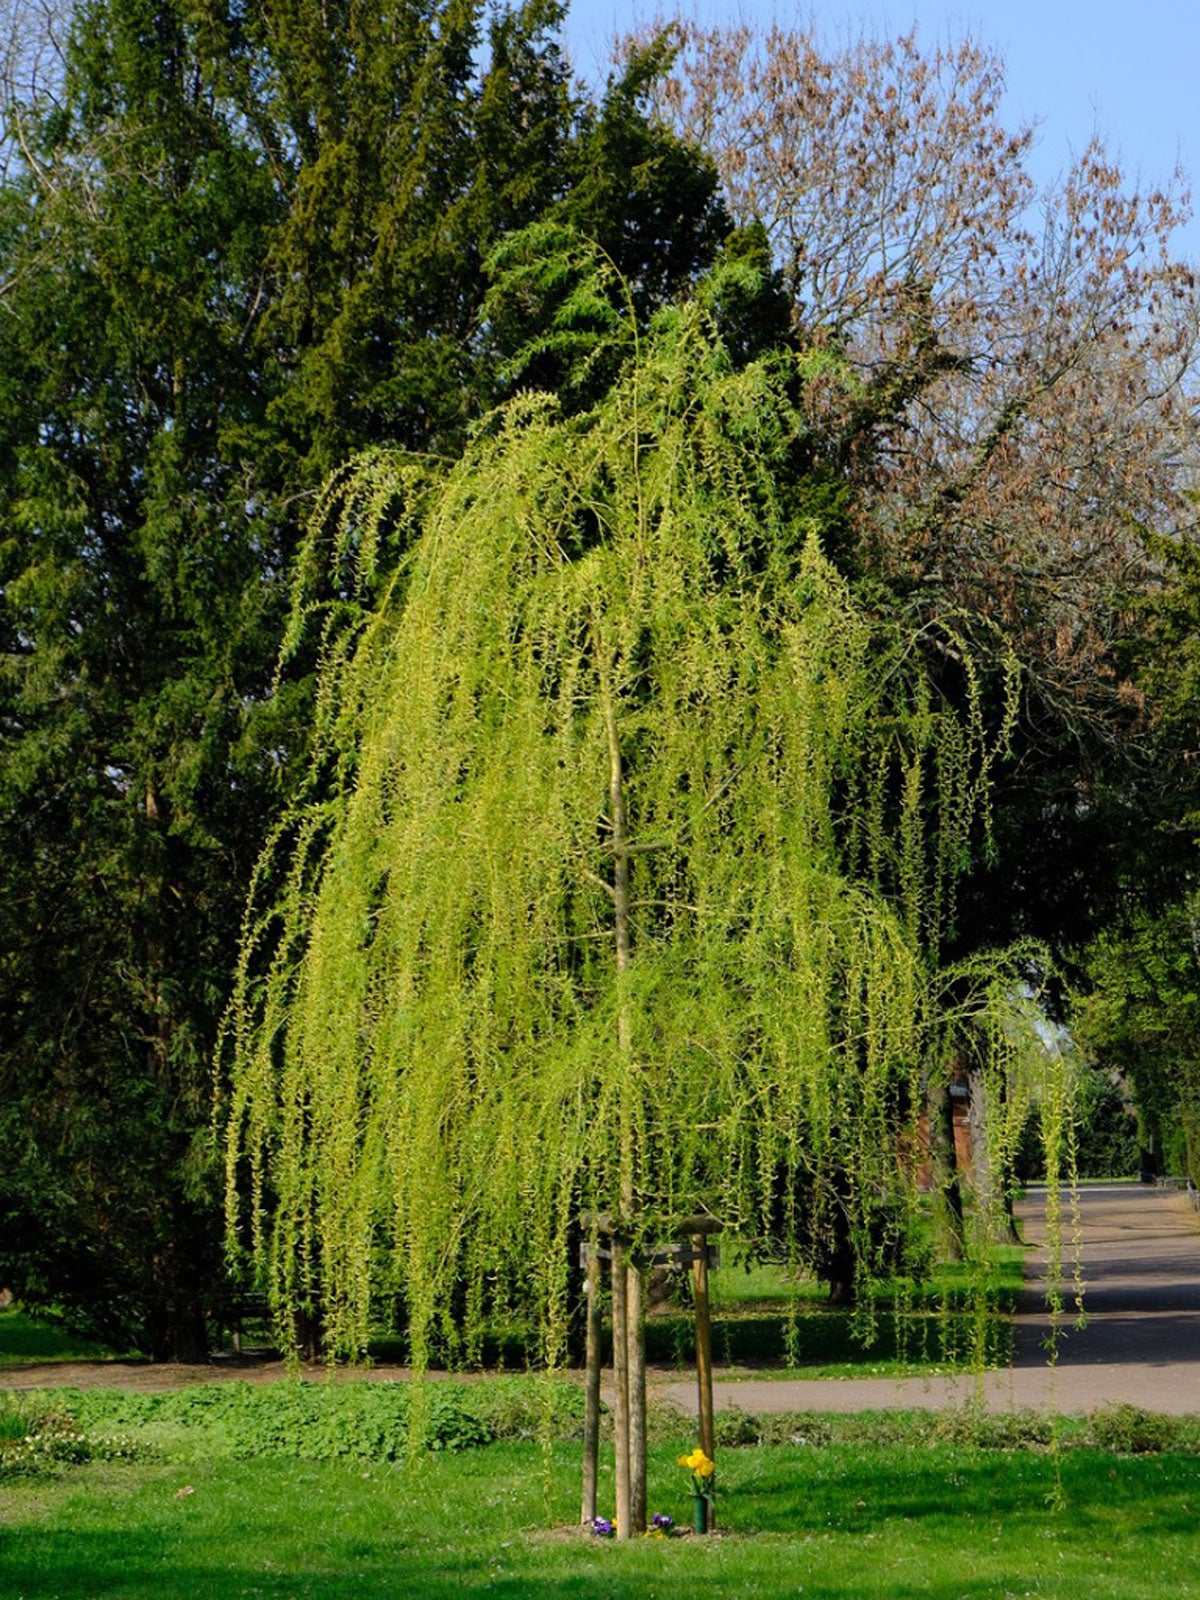 different-willows-common-varieties-of-willow-trees-and-shrubs